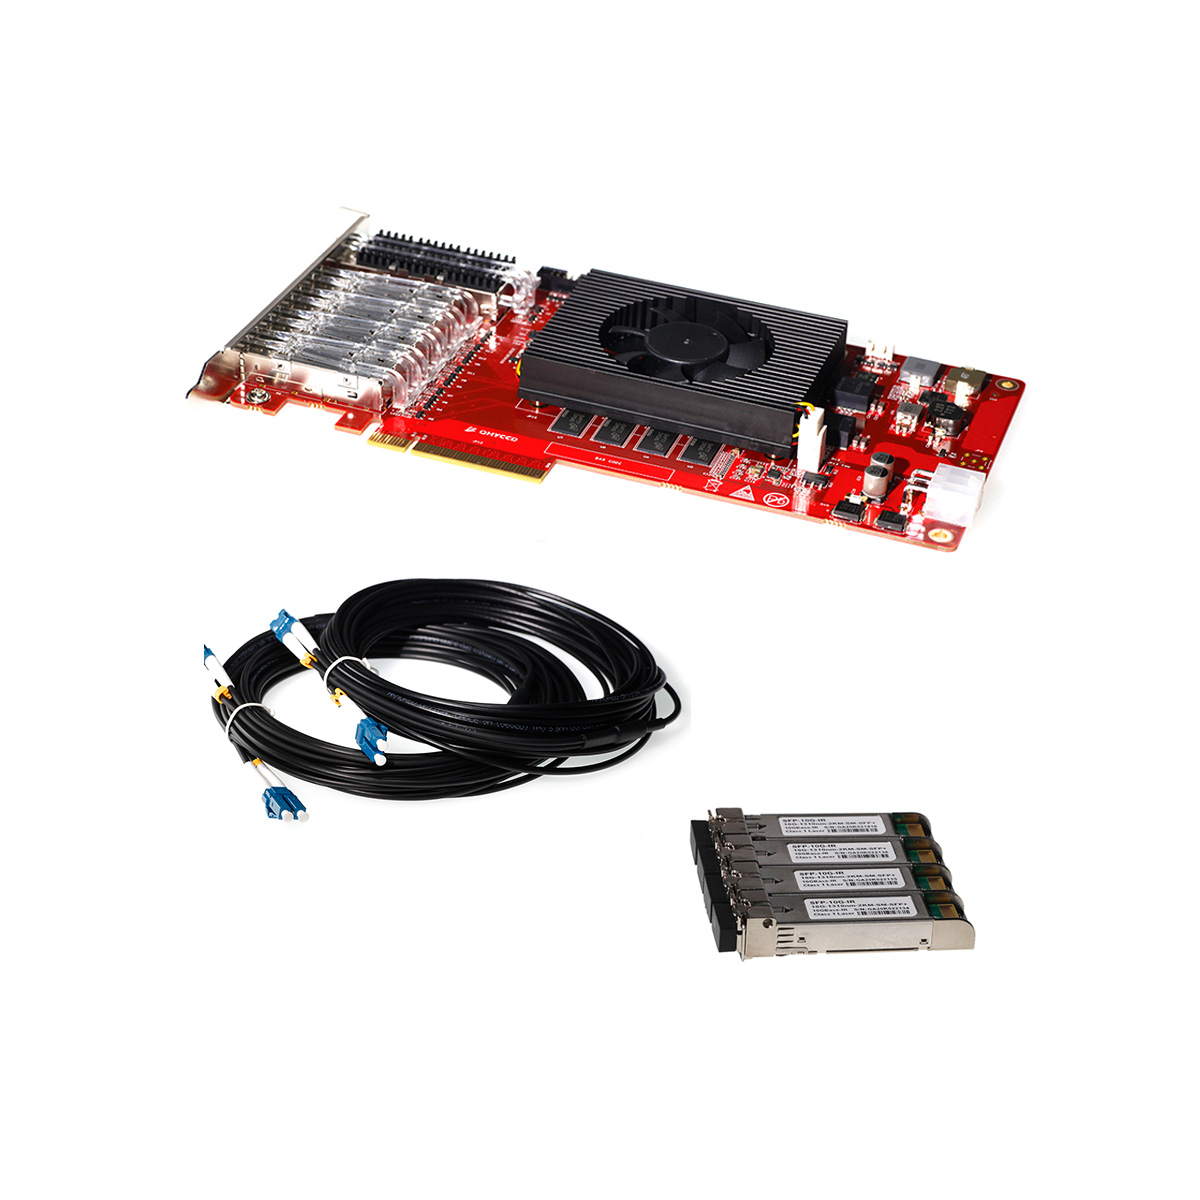 QHY Fiber Graber Card is a PCIE2.0 x 8 image data graber card. It supports 2*10Gbps high-speed optical communication between the camera and the computer.